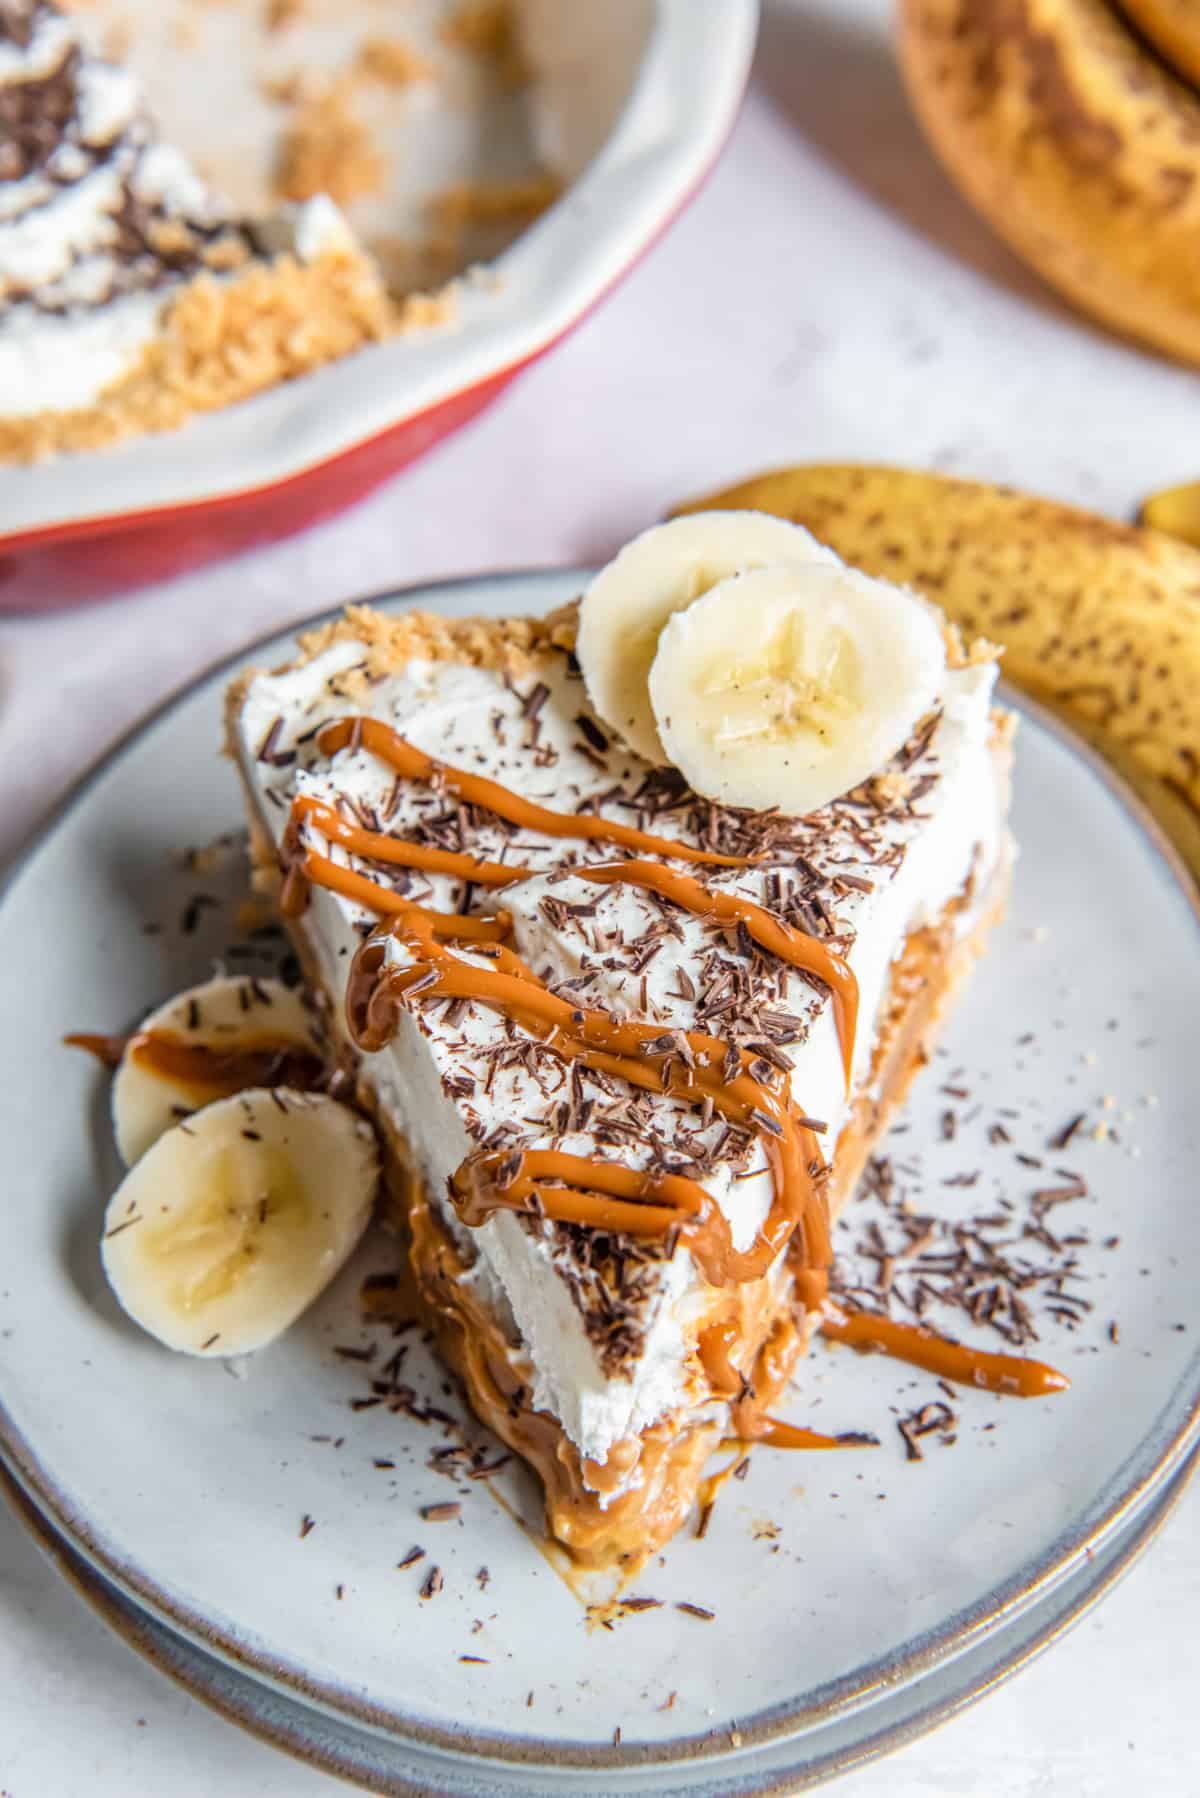 a slice of banoffee pie garnished with banana slices